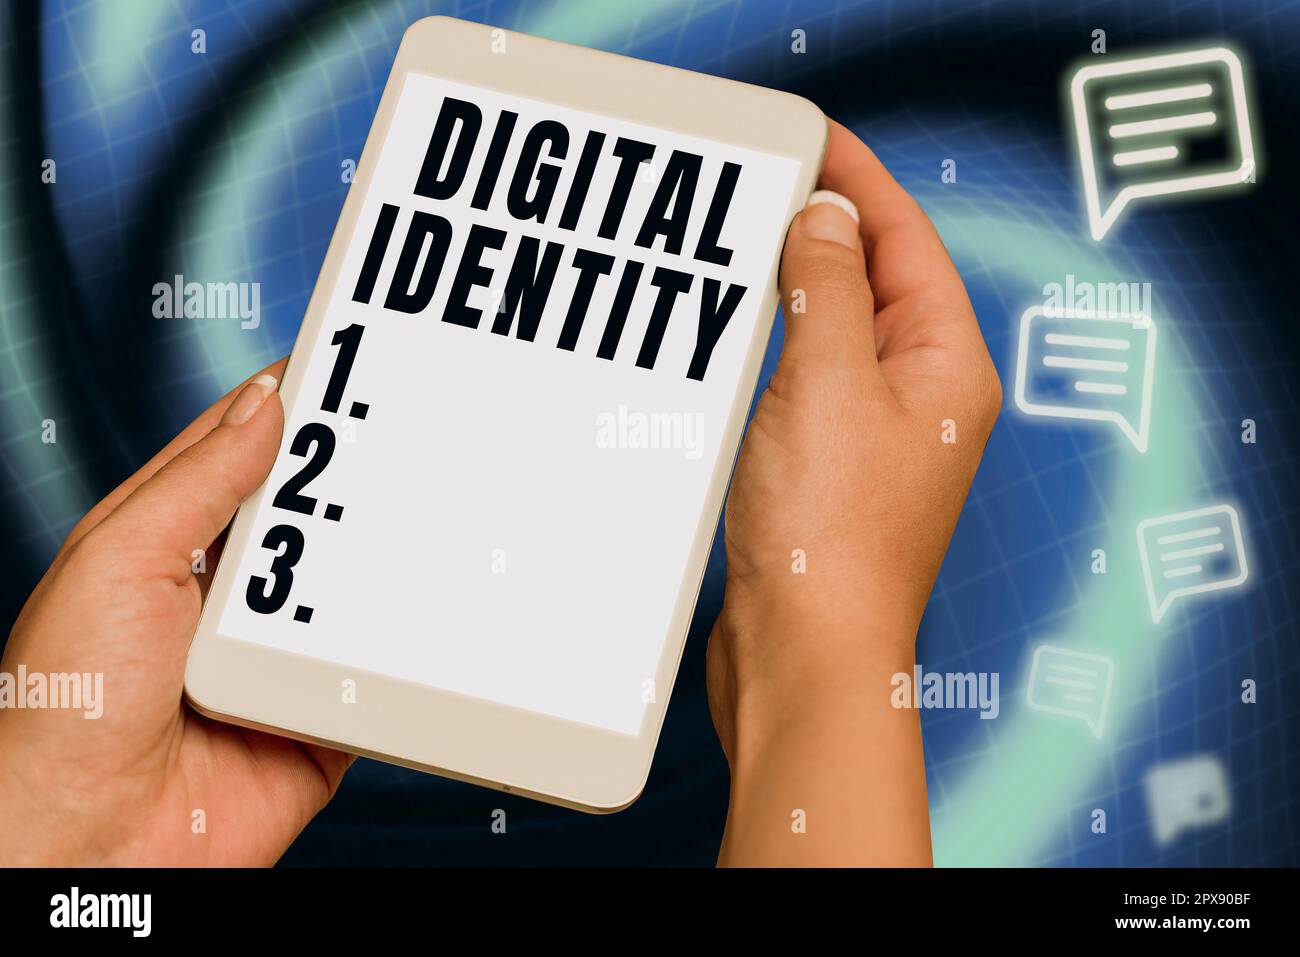 Inspiration showing sign Digital Identity, Word for networked identity adopted or claimed in cyberspace Stock Photo